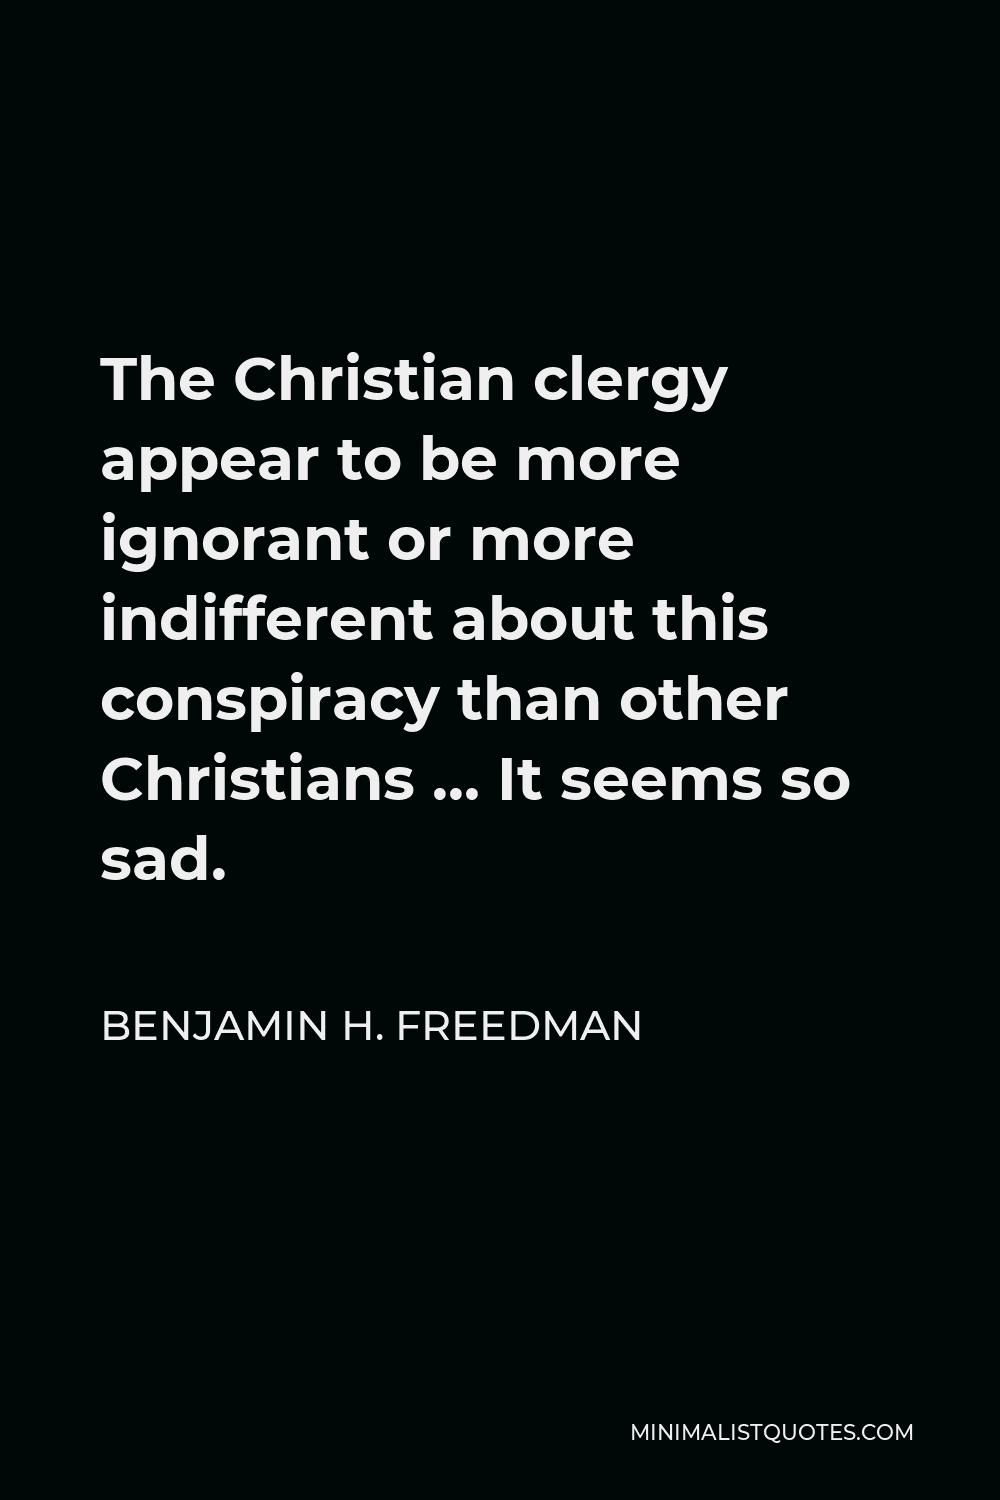 Benjamin H. Freedman Quote - The Christian clergy appear to be more ignorant or more indifferent about this conspiracy than other Christians … It seems so sad.